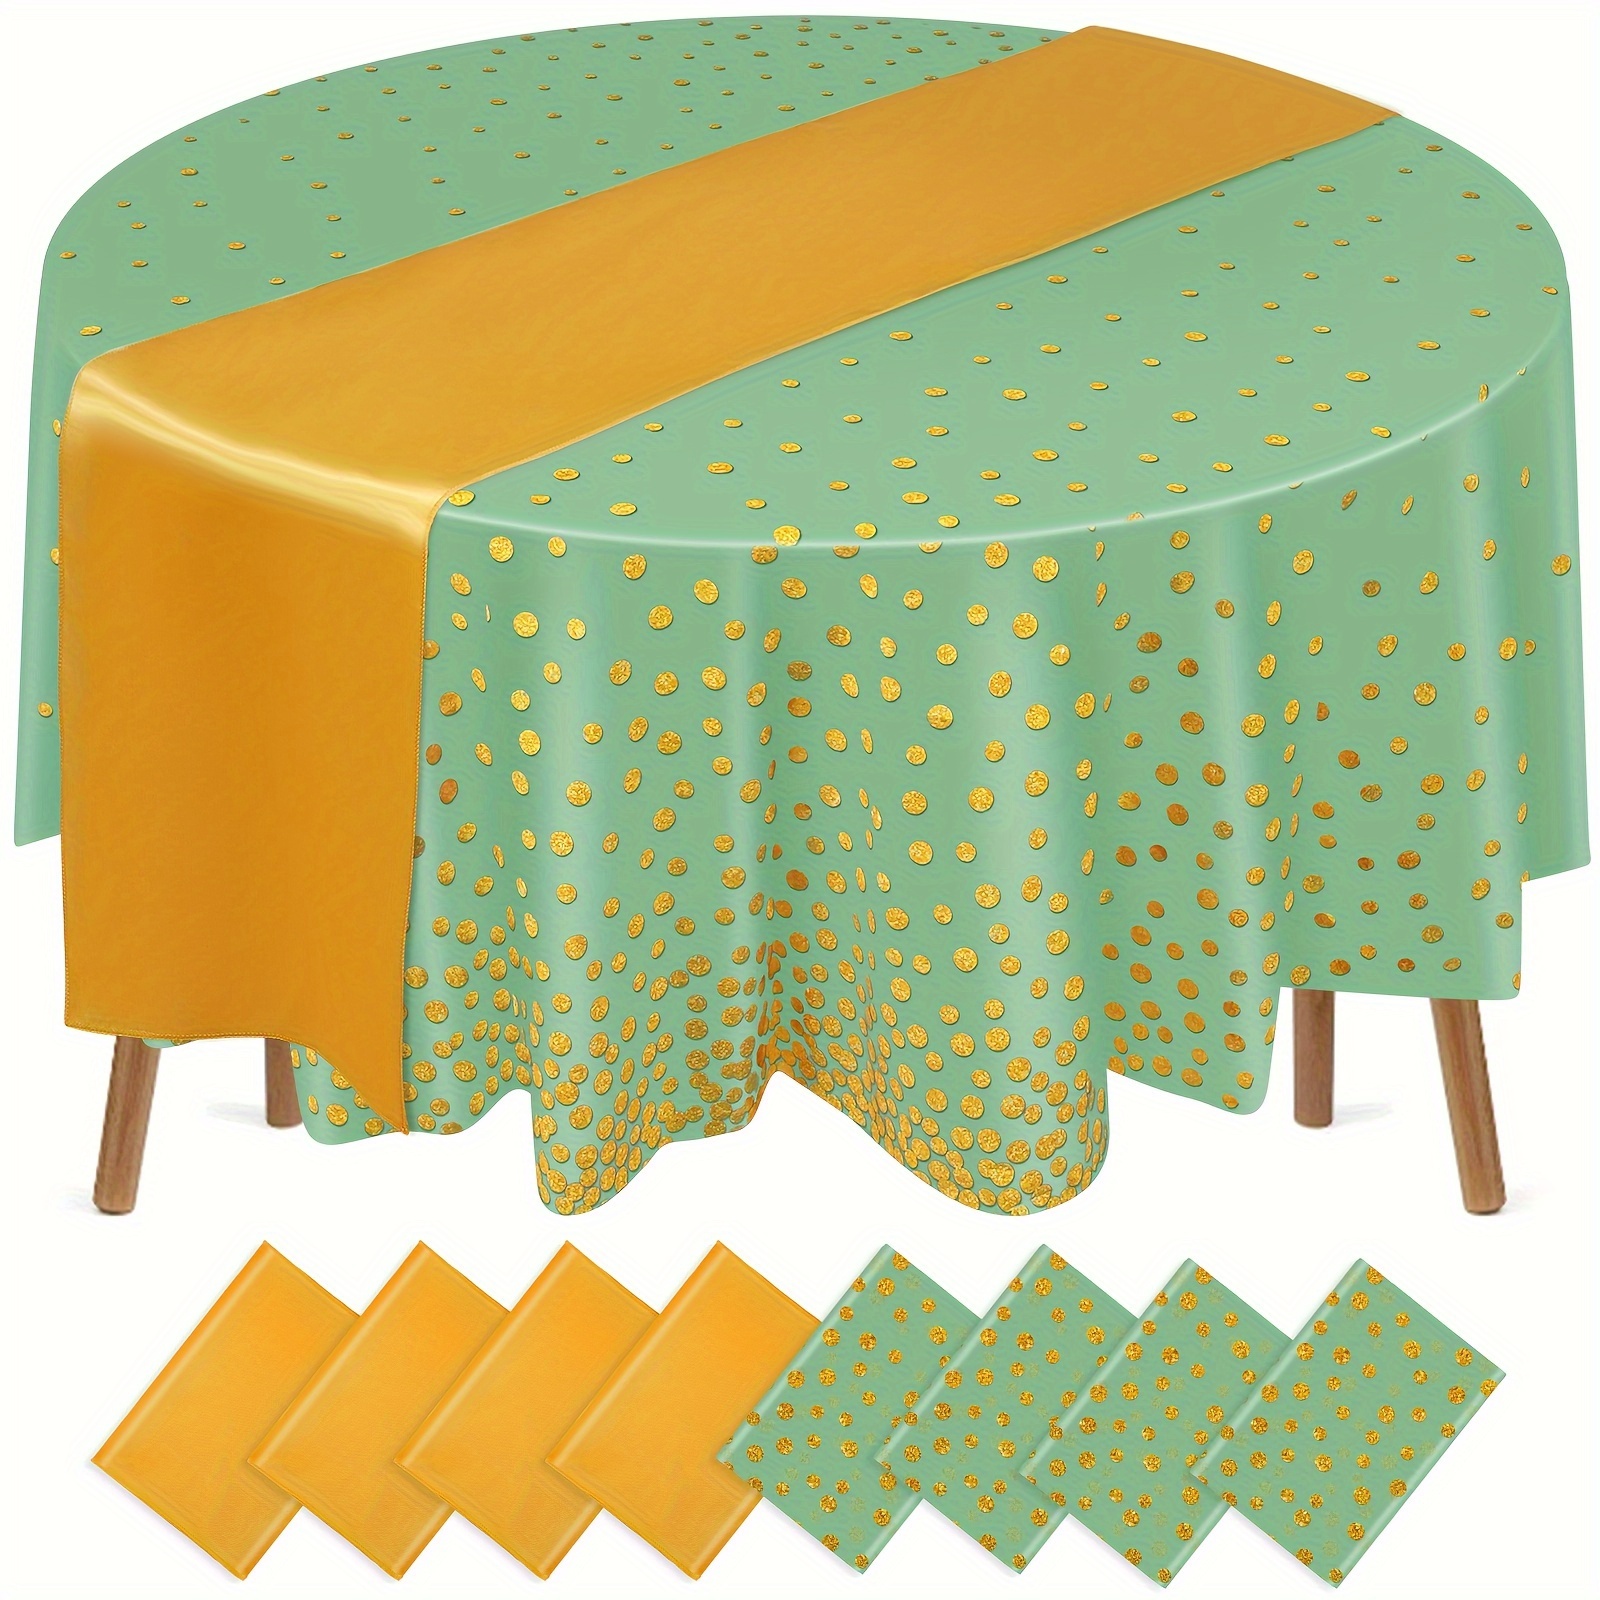 

Graduation Plastic Round Tablecloths And Satin Table Runner Set 84 Inch Grad Tablecloth Disposable Table Cover For Graduation Wedding Birthday Party(sage Green, Gold, 4 Sets)